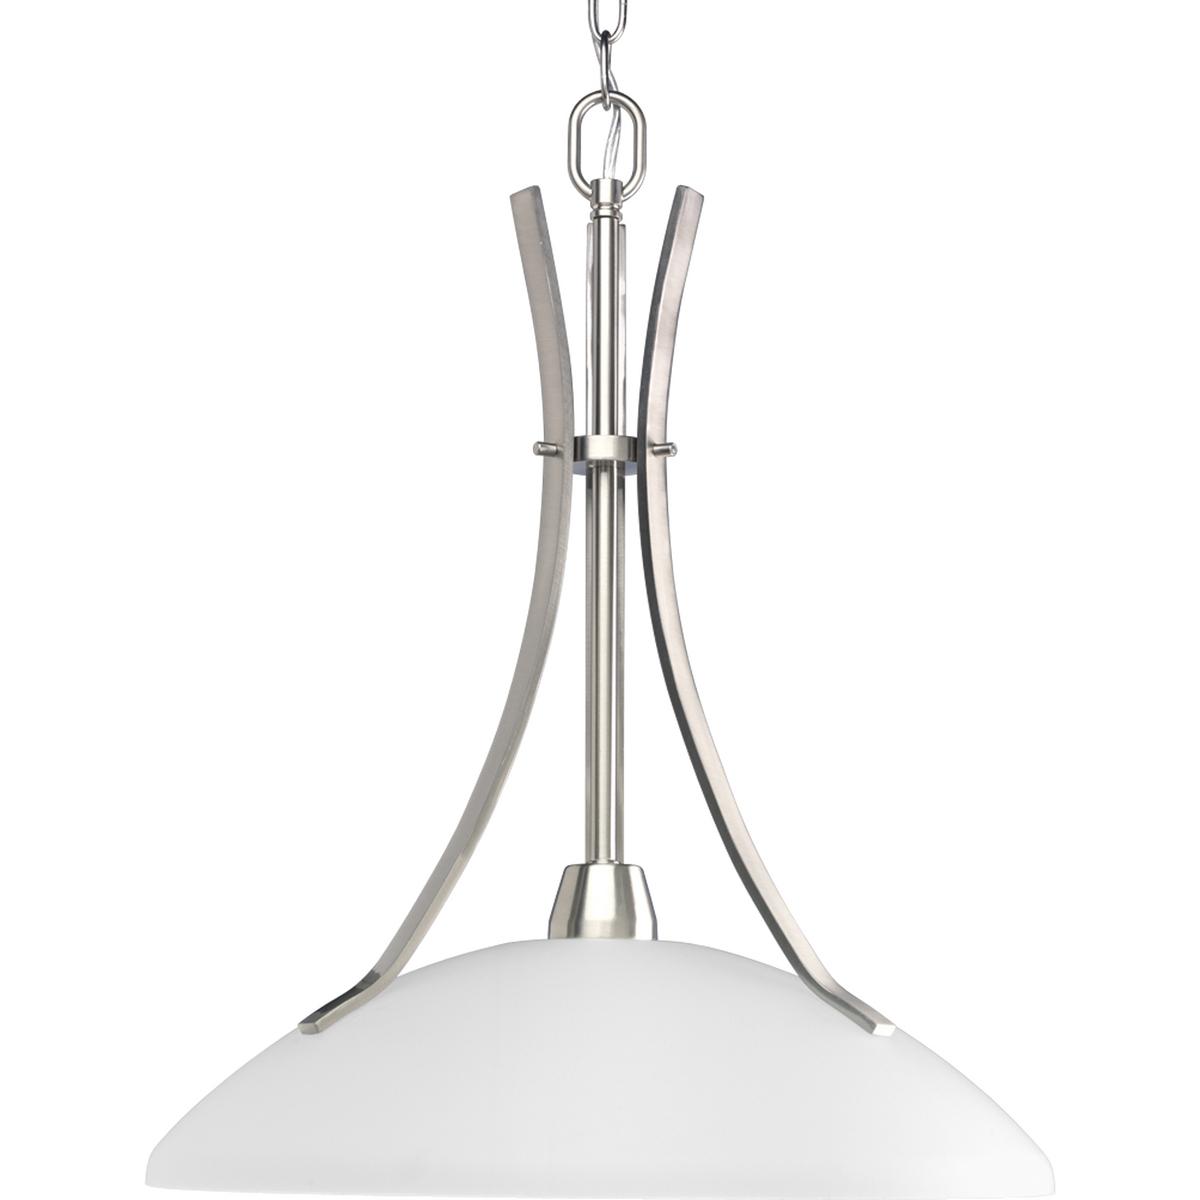 Hubbell P5112-09 The Wisten Collection features sweeping arcs framing elegant, tapered glass shades. Cool and modern with a casual flair, Wisten provides a signature look to any room. One-light pendant with etched glass in a Brushed Nickel finish.  ; Sweeping arms framing